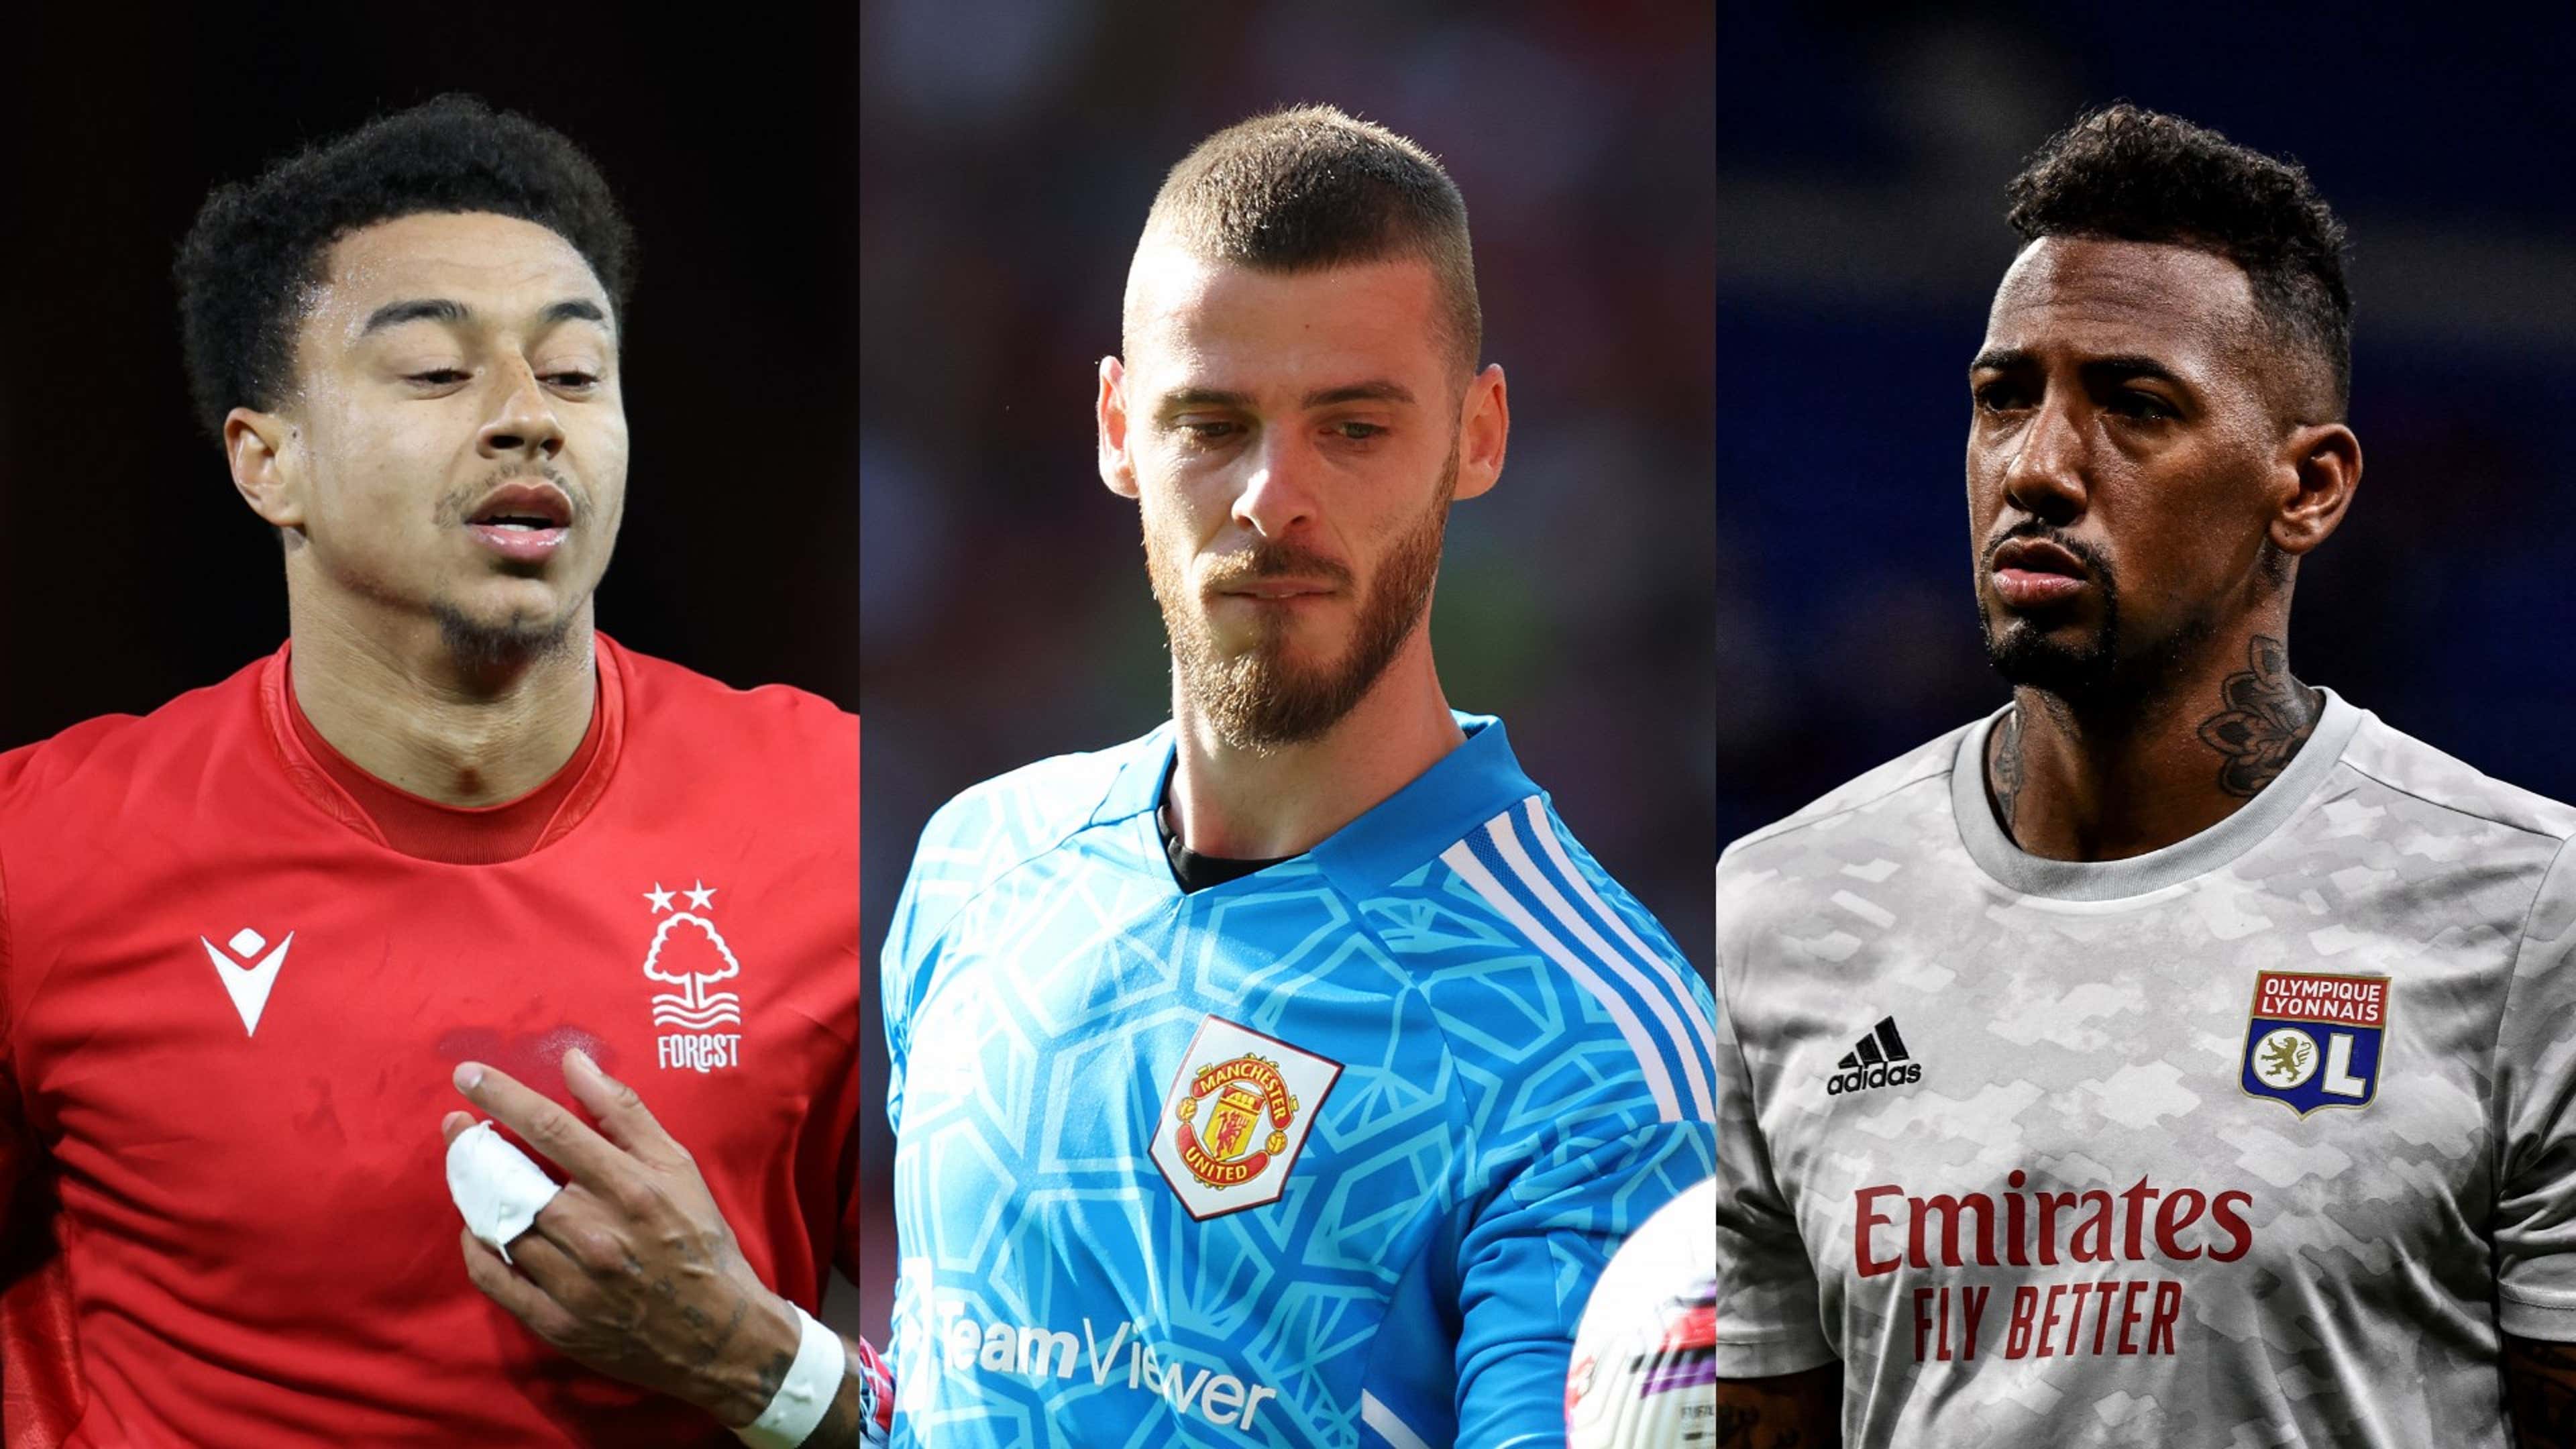 Football Manager free agents